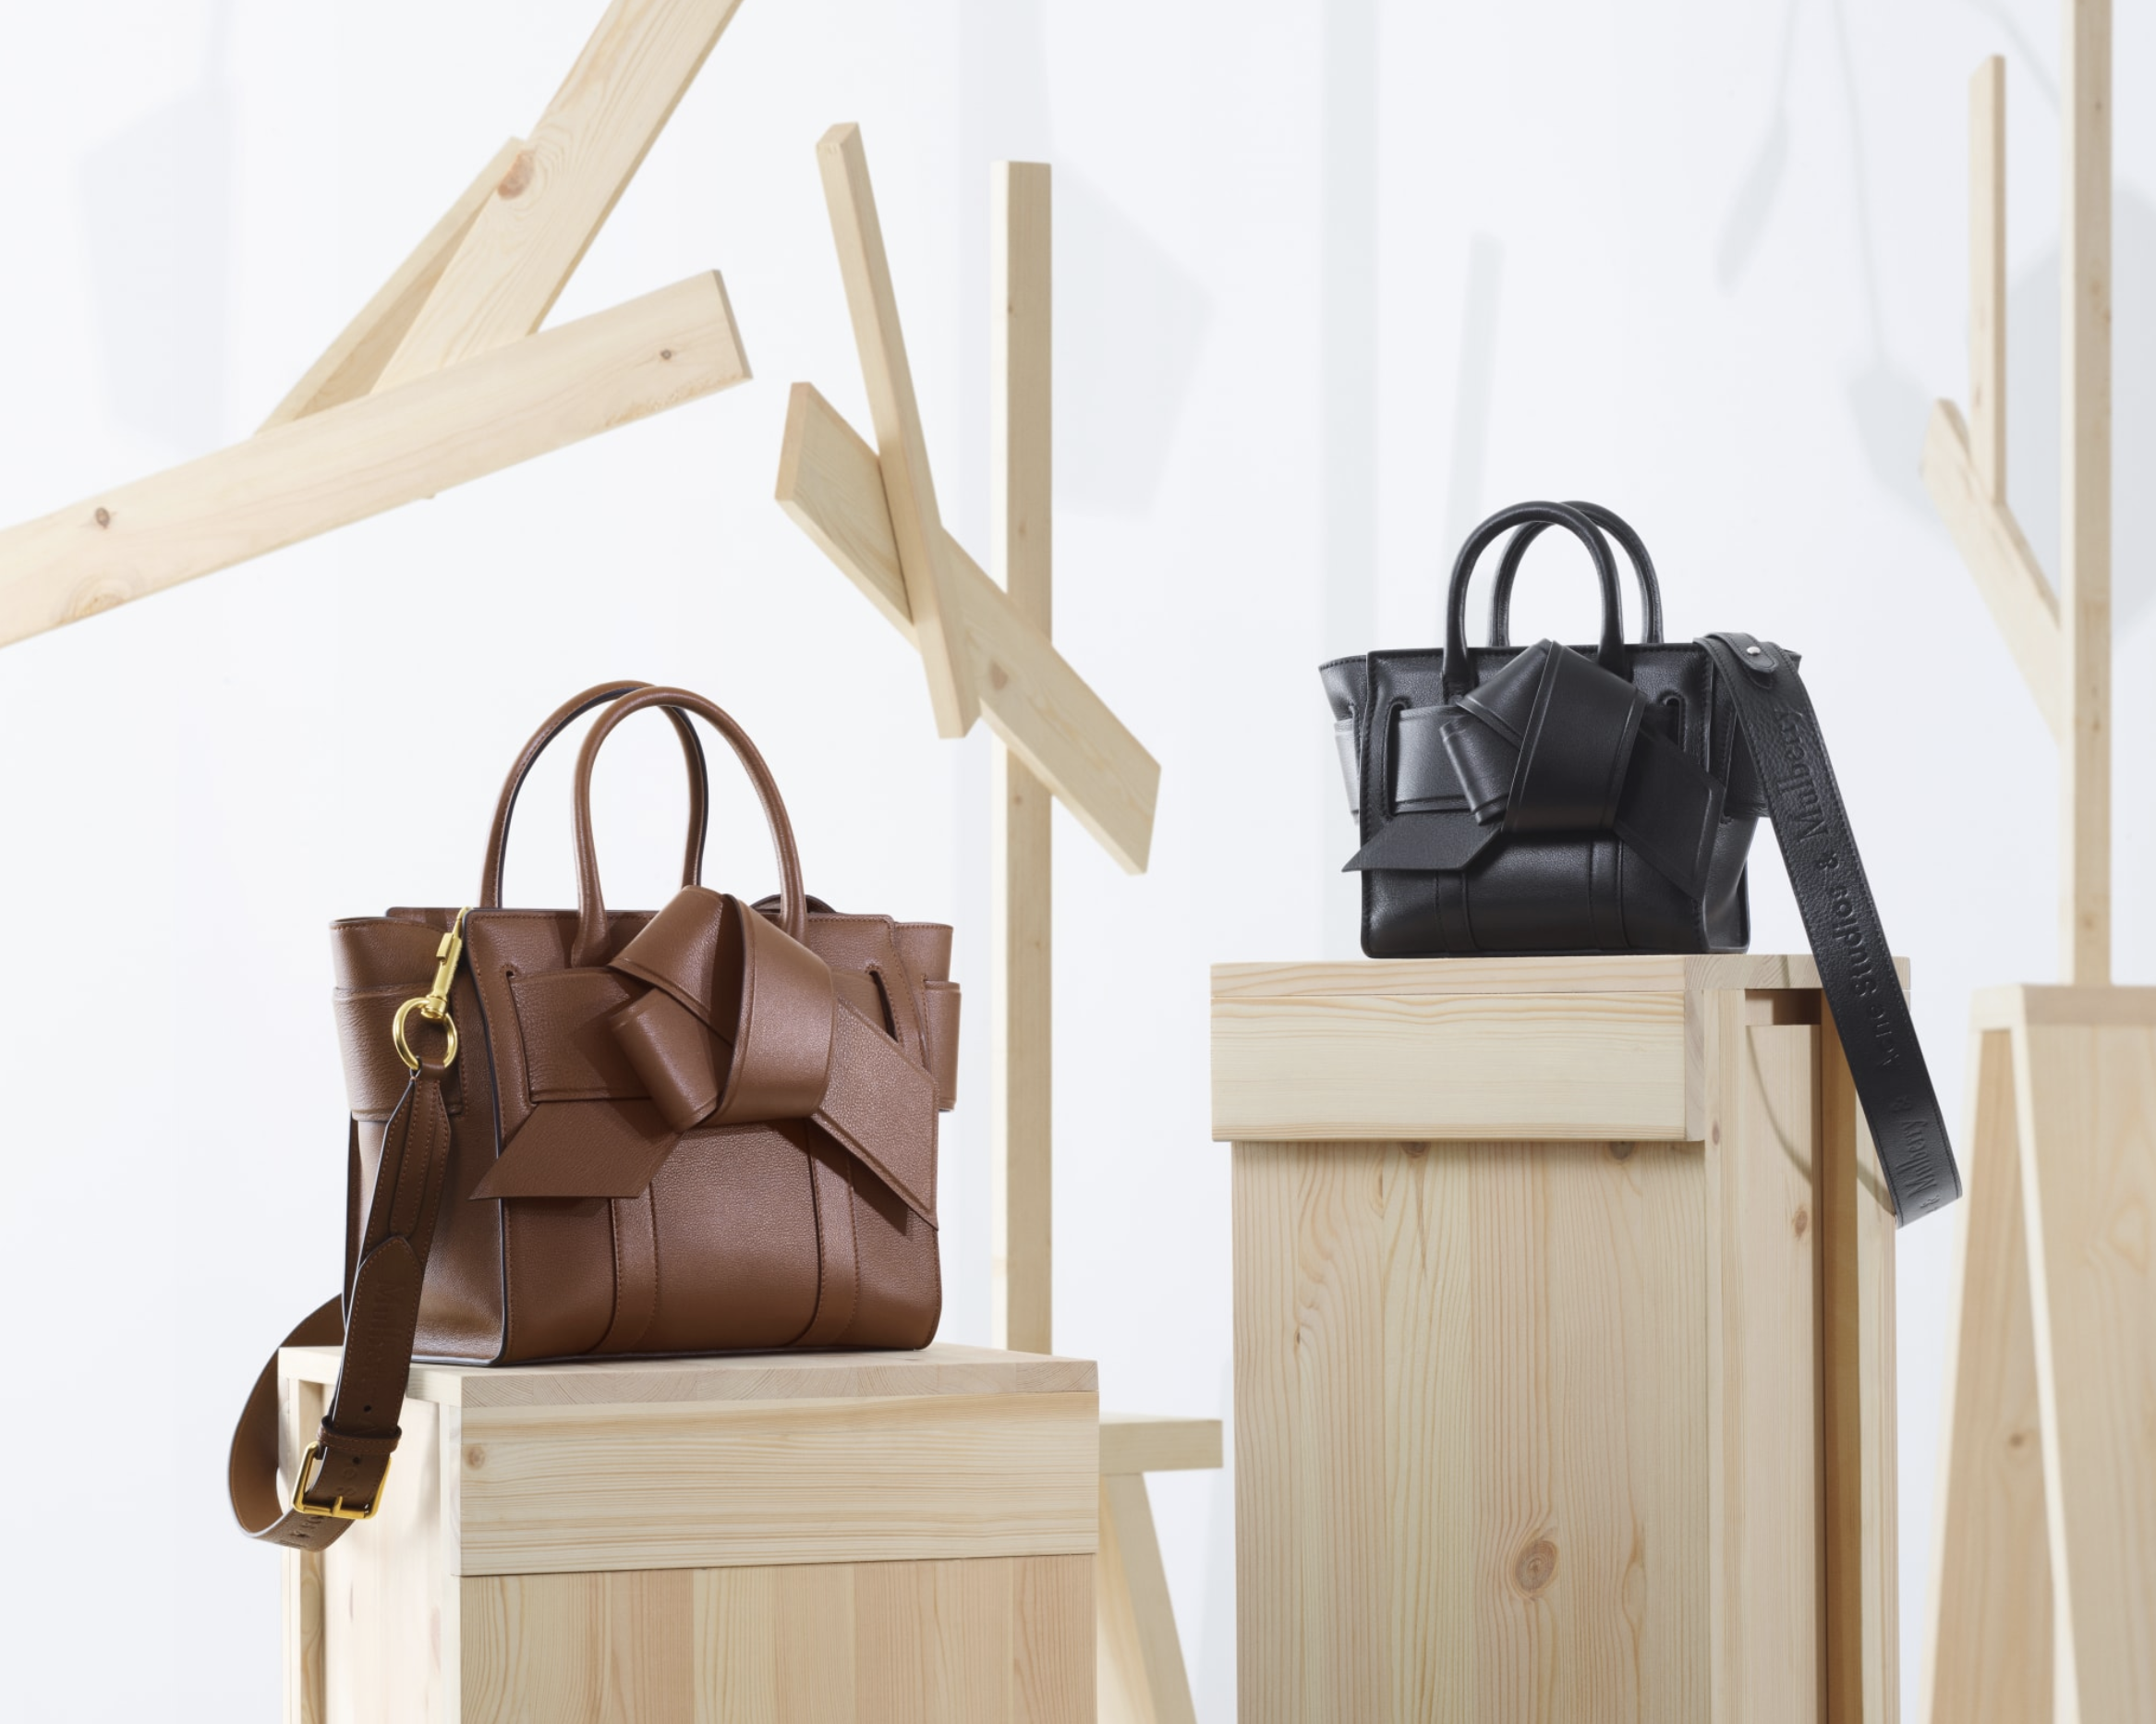 Acne Studios and Mulberry Combine Signature Handbag Styles in New 